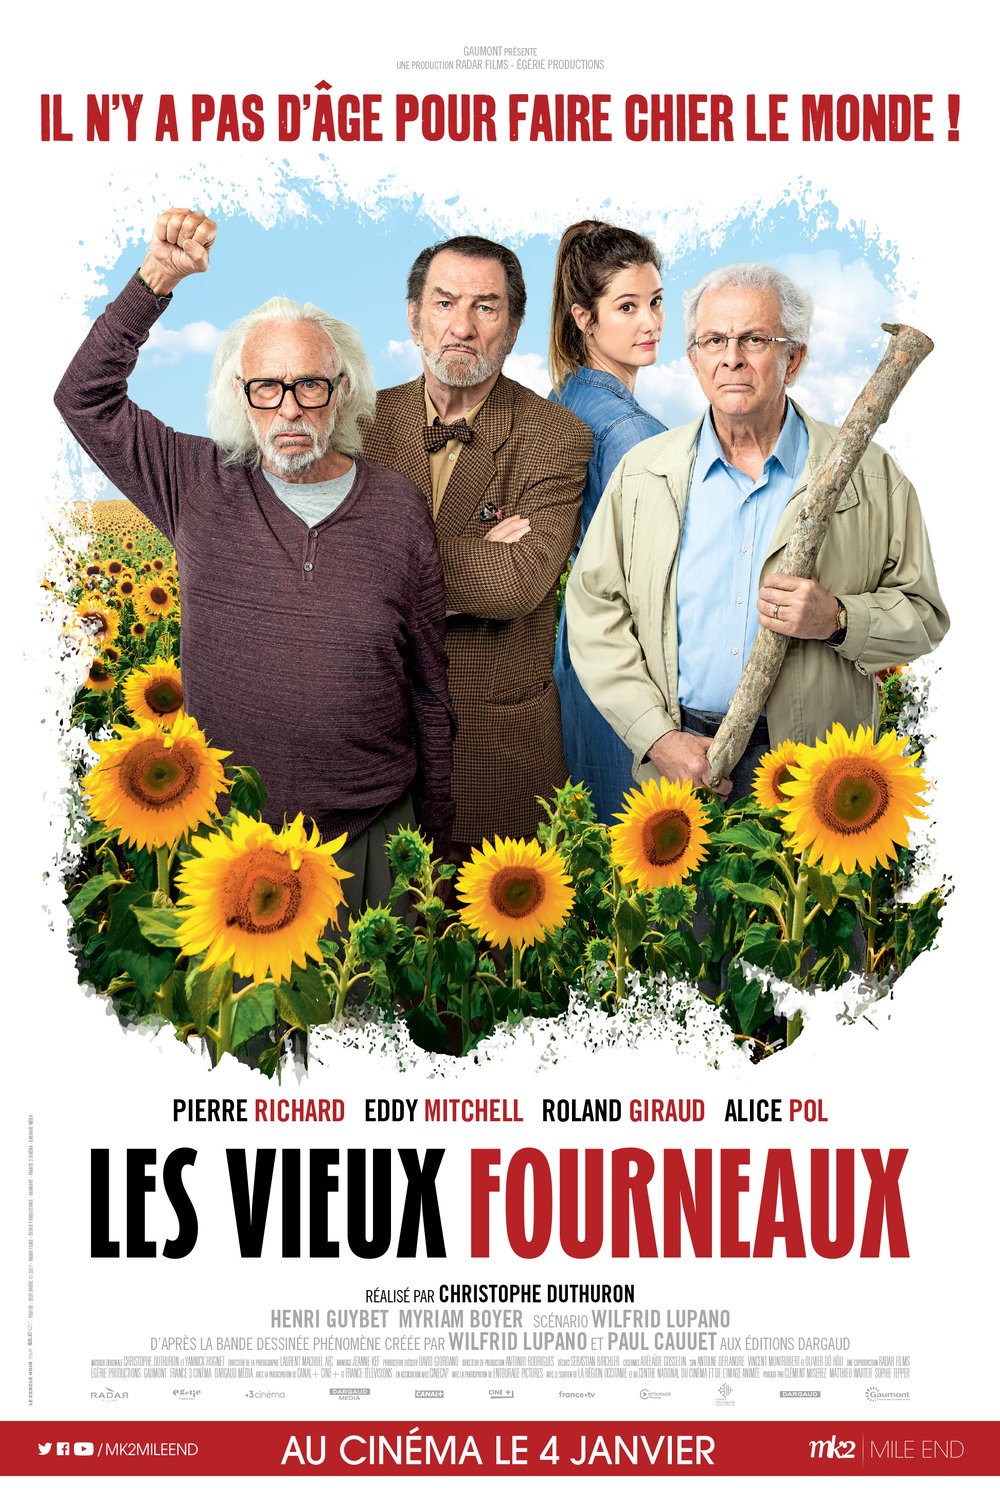 Poster of the movie Les Vieux fourneaux